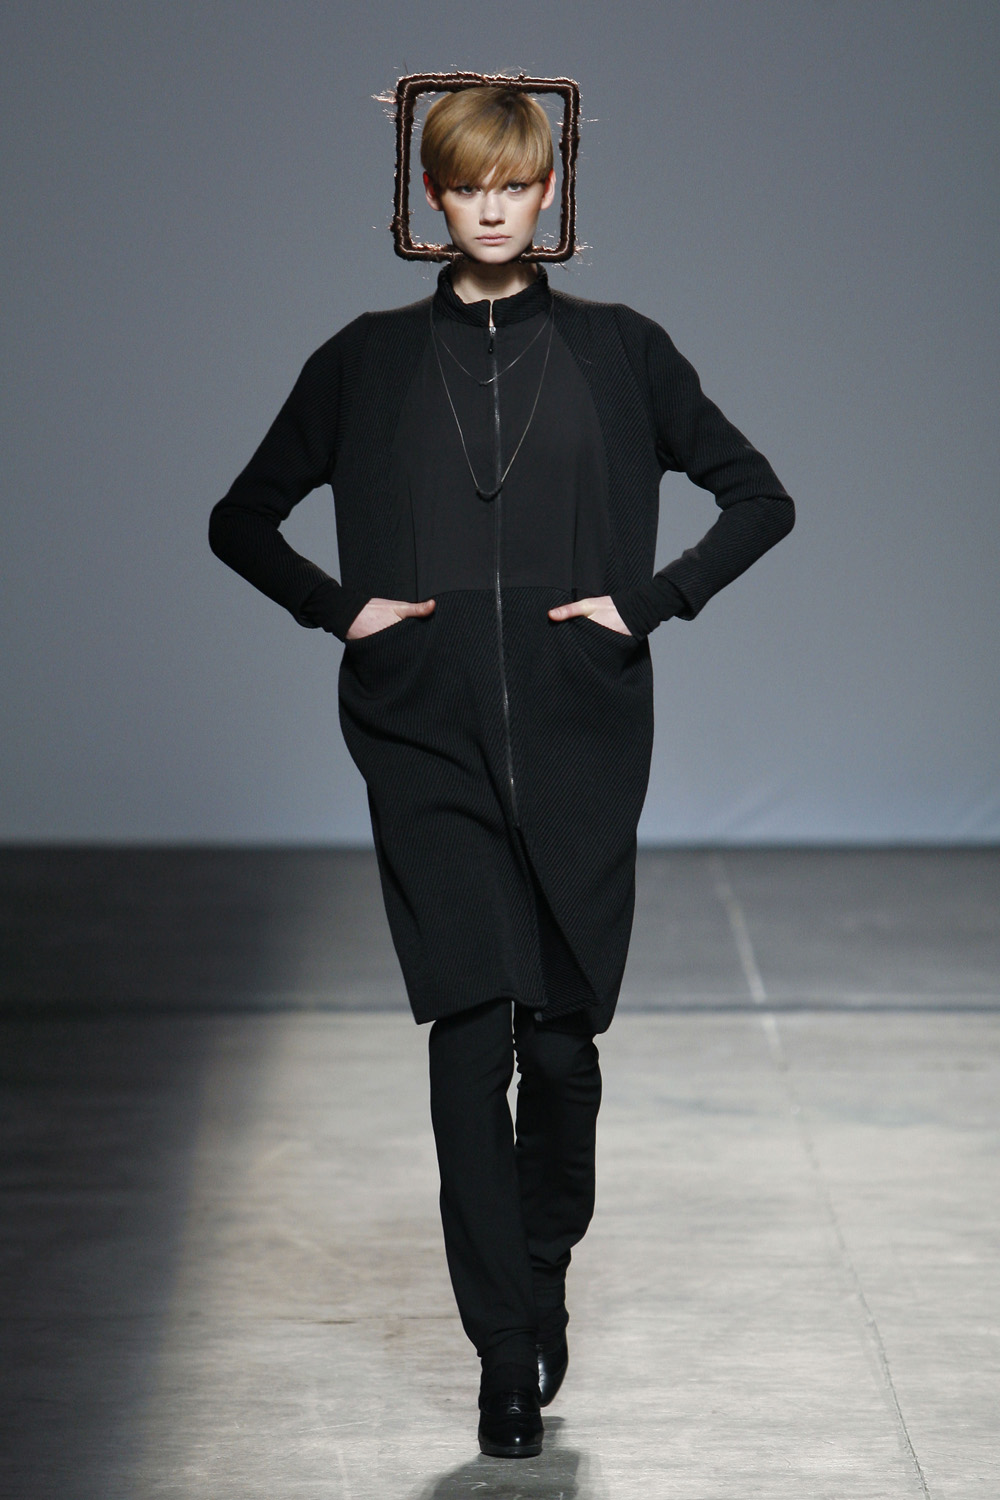 Txell Miras Fall 2009: Space Within a Frame